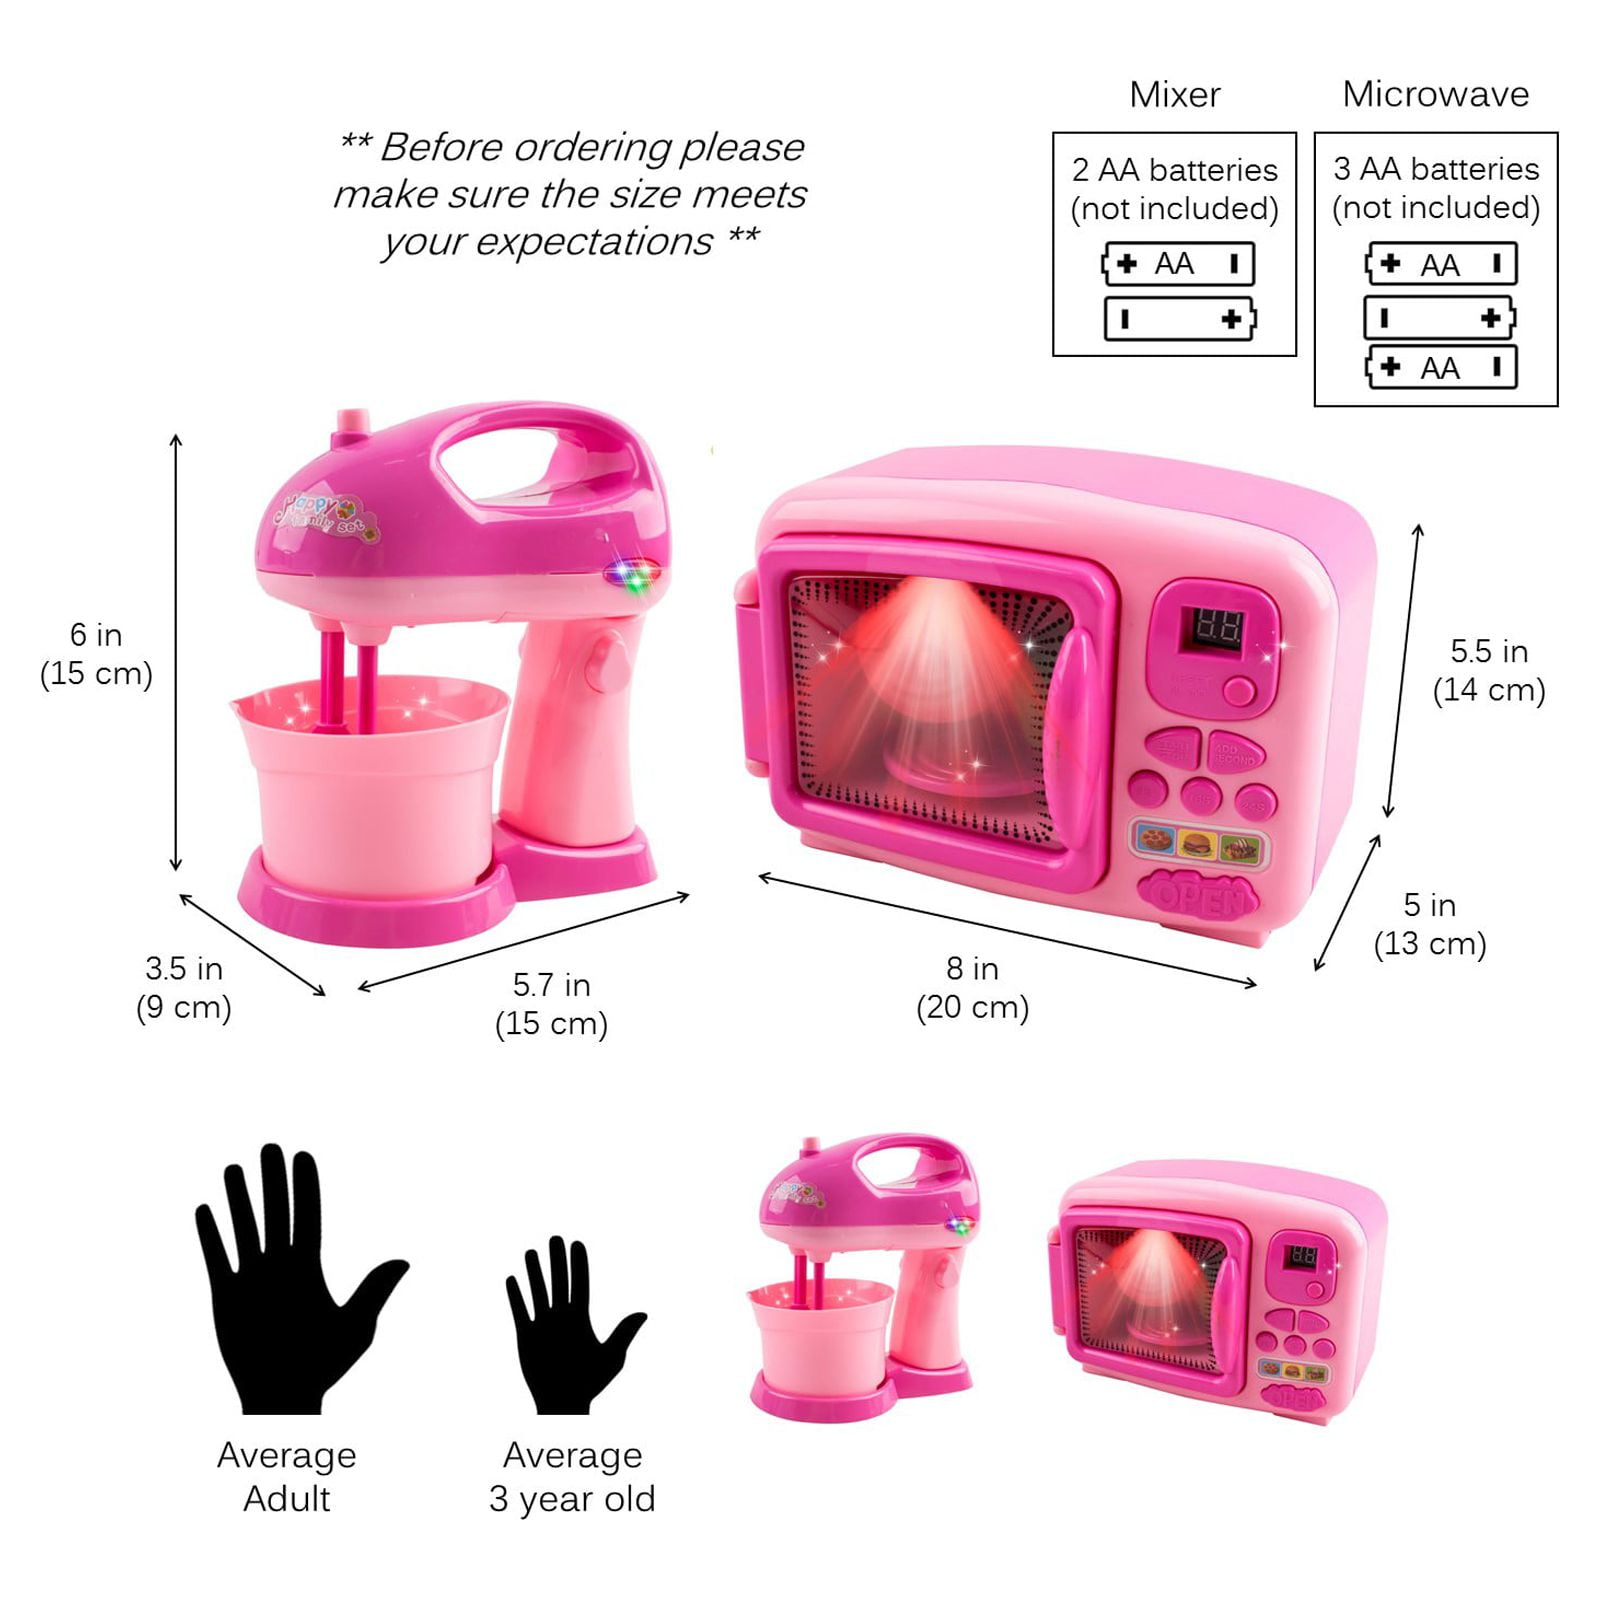 Play@Home Microwave Oven Toy ❤ Cooking Play Set For Kids ❤ Make